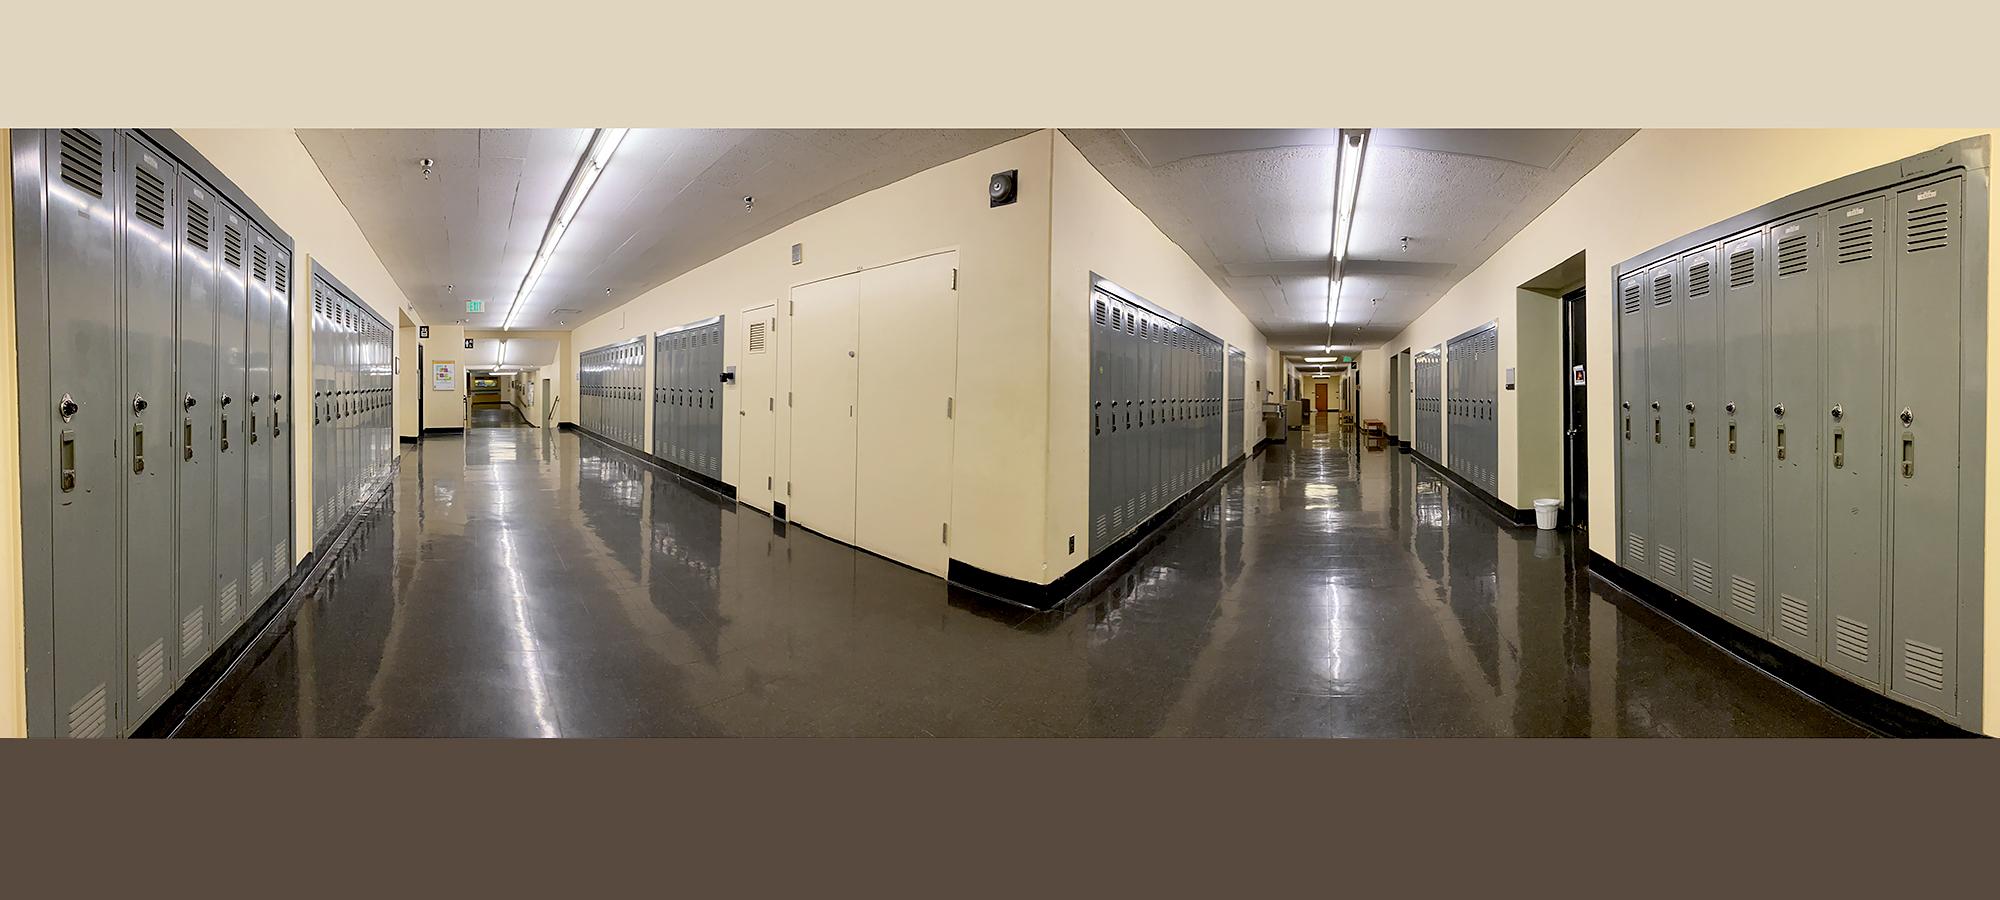 Campus lockers for rent are seen on all sides of a corridor intersection in Cramer Hall.